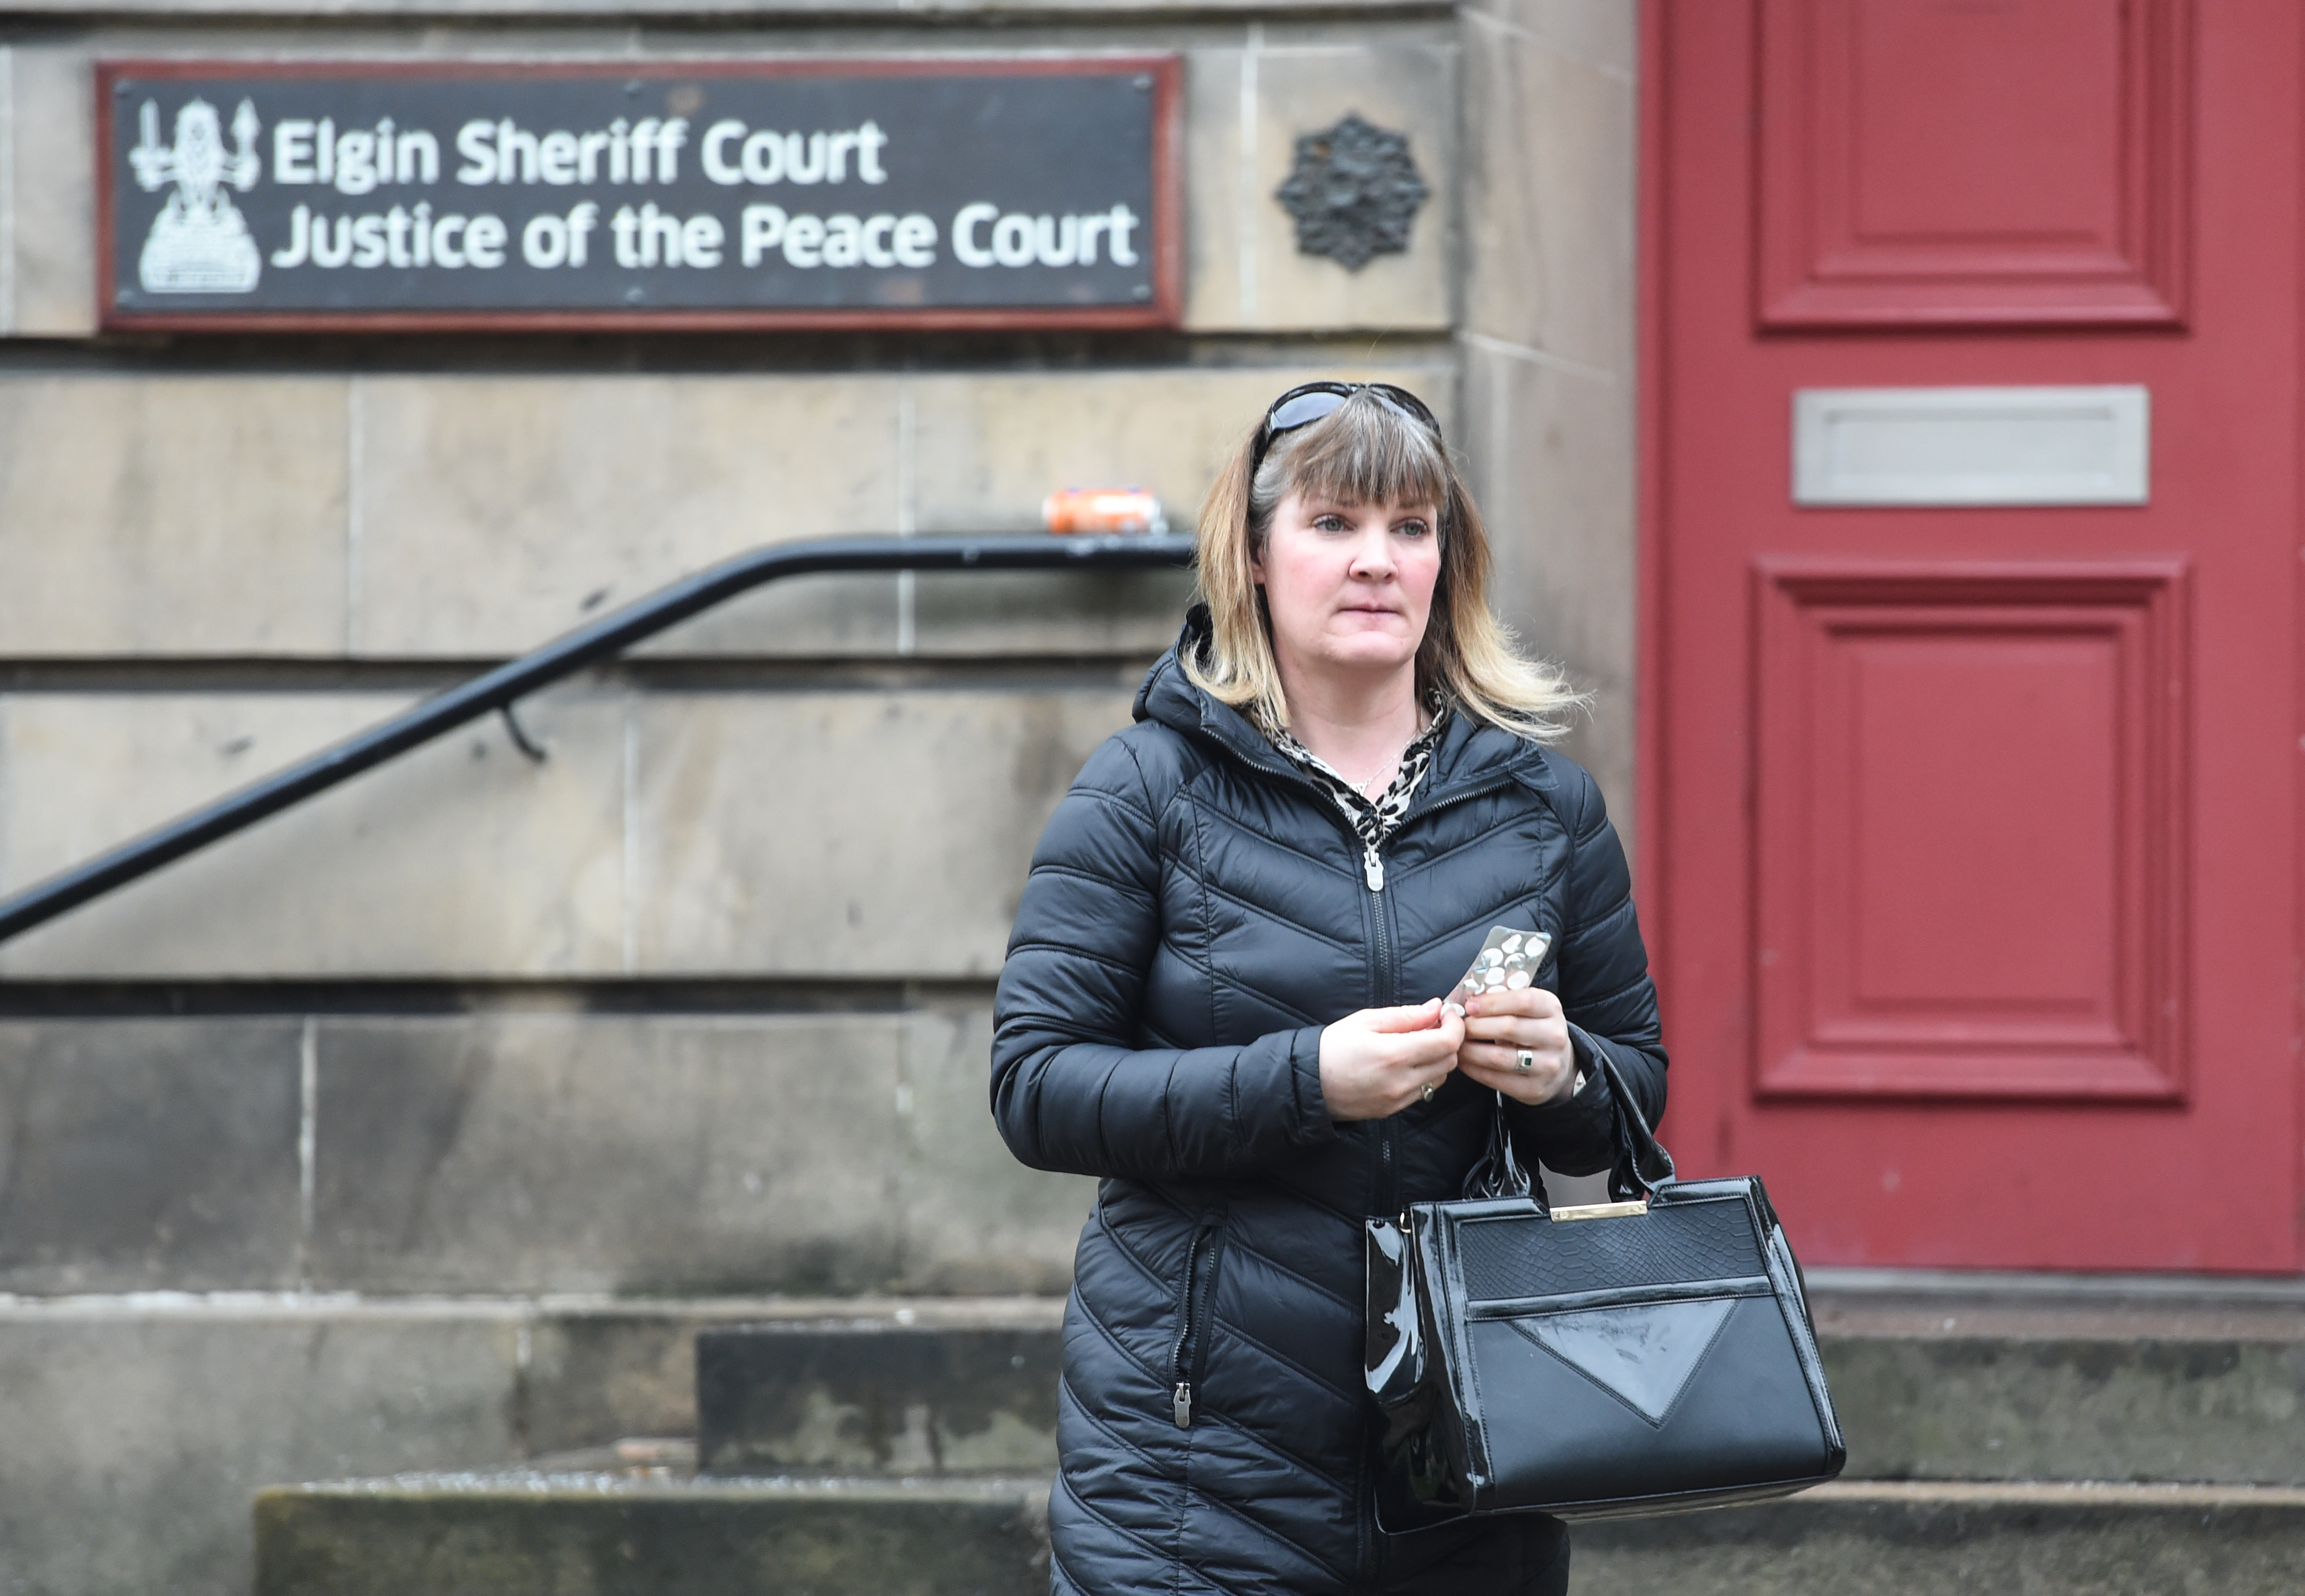 Sarah Sinclair pictured outside of Elgin Sheriff Court in Moray.